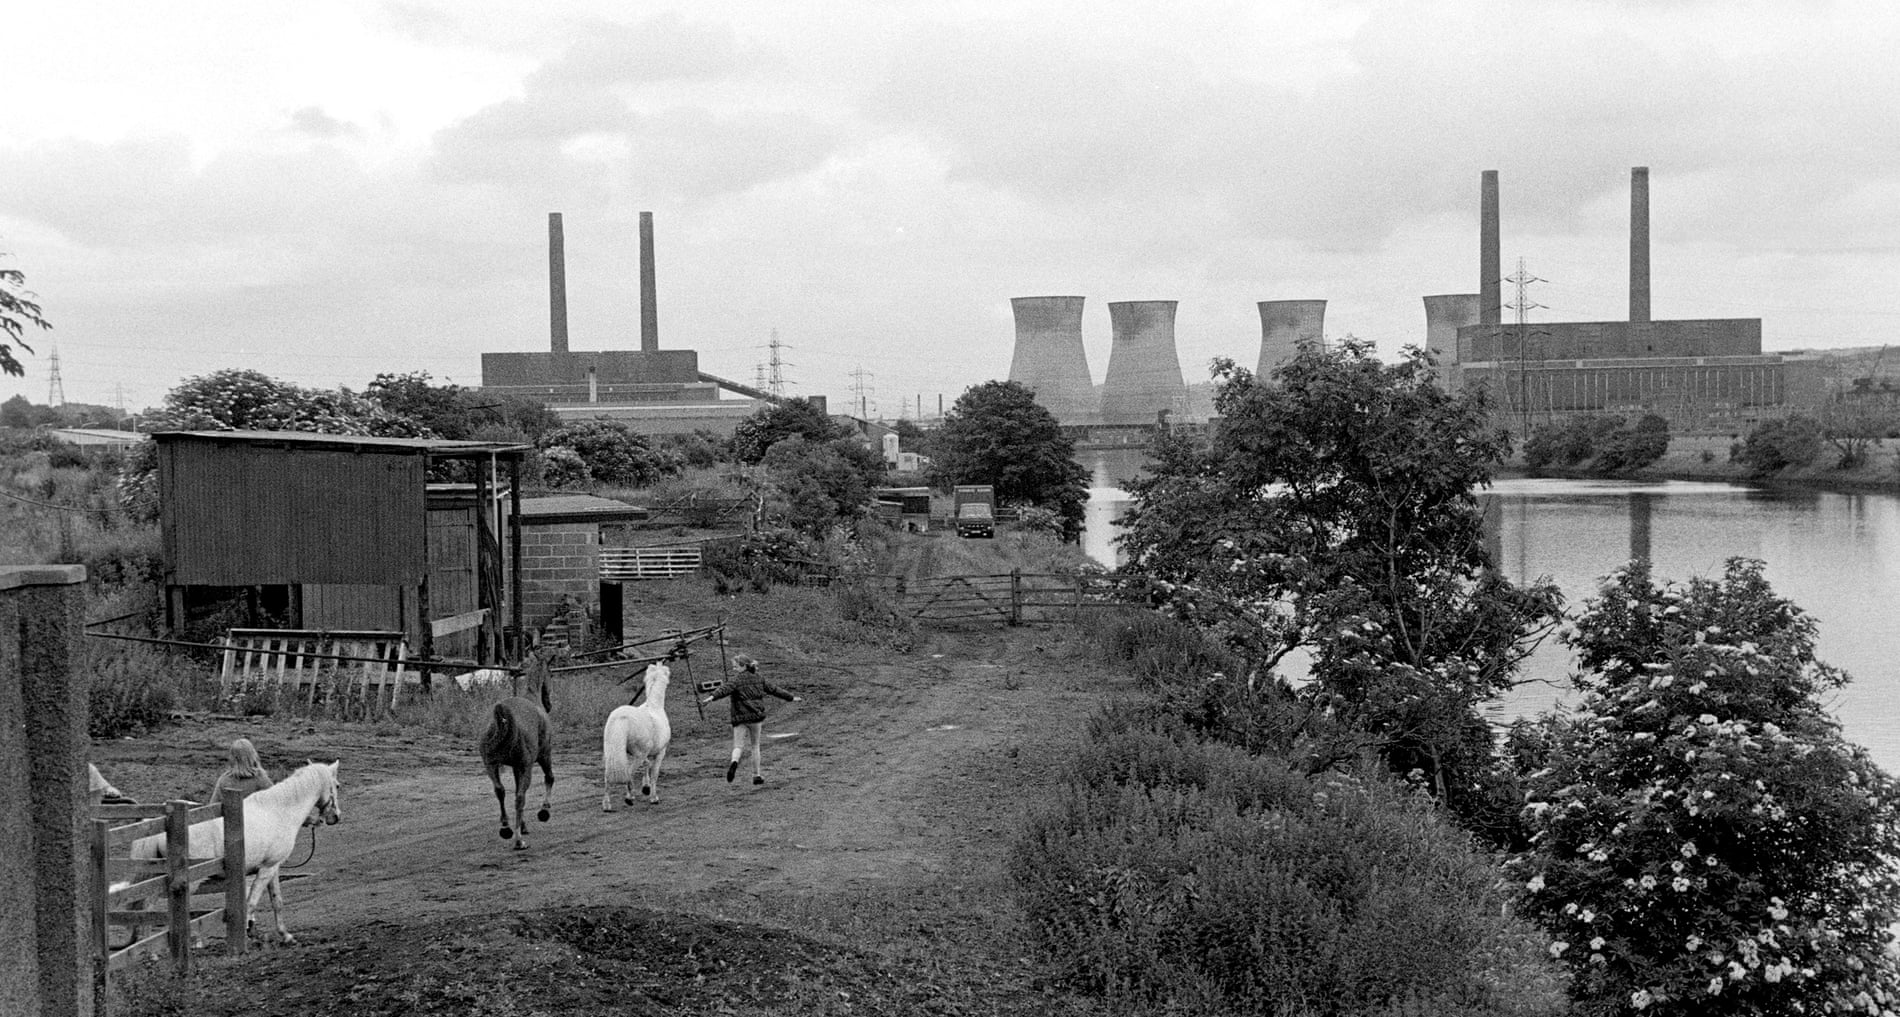 The Stella South power station, looking east down the Tyne from Newburn, 1986.